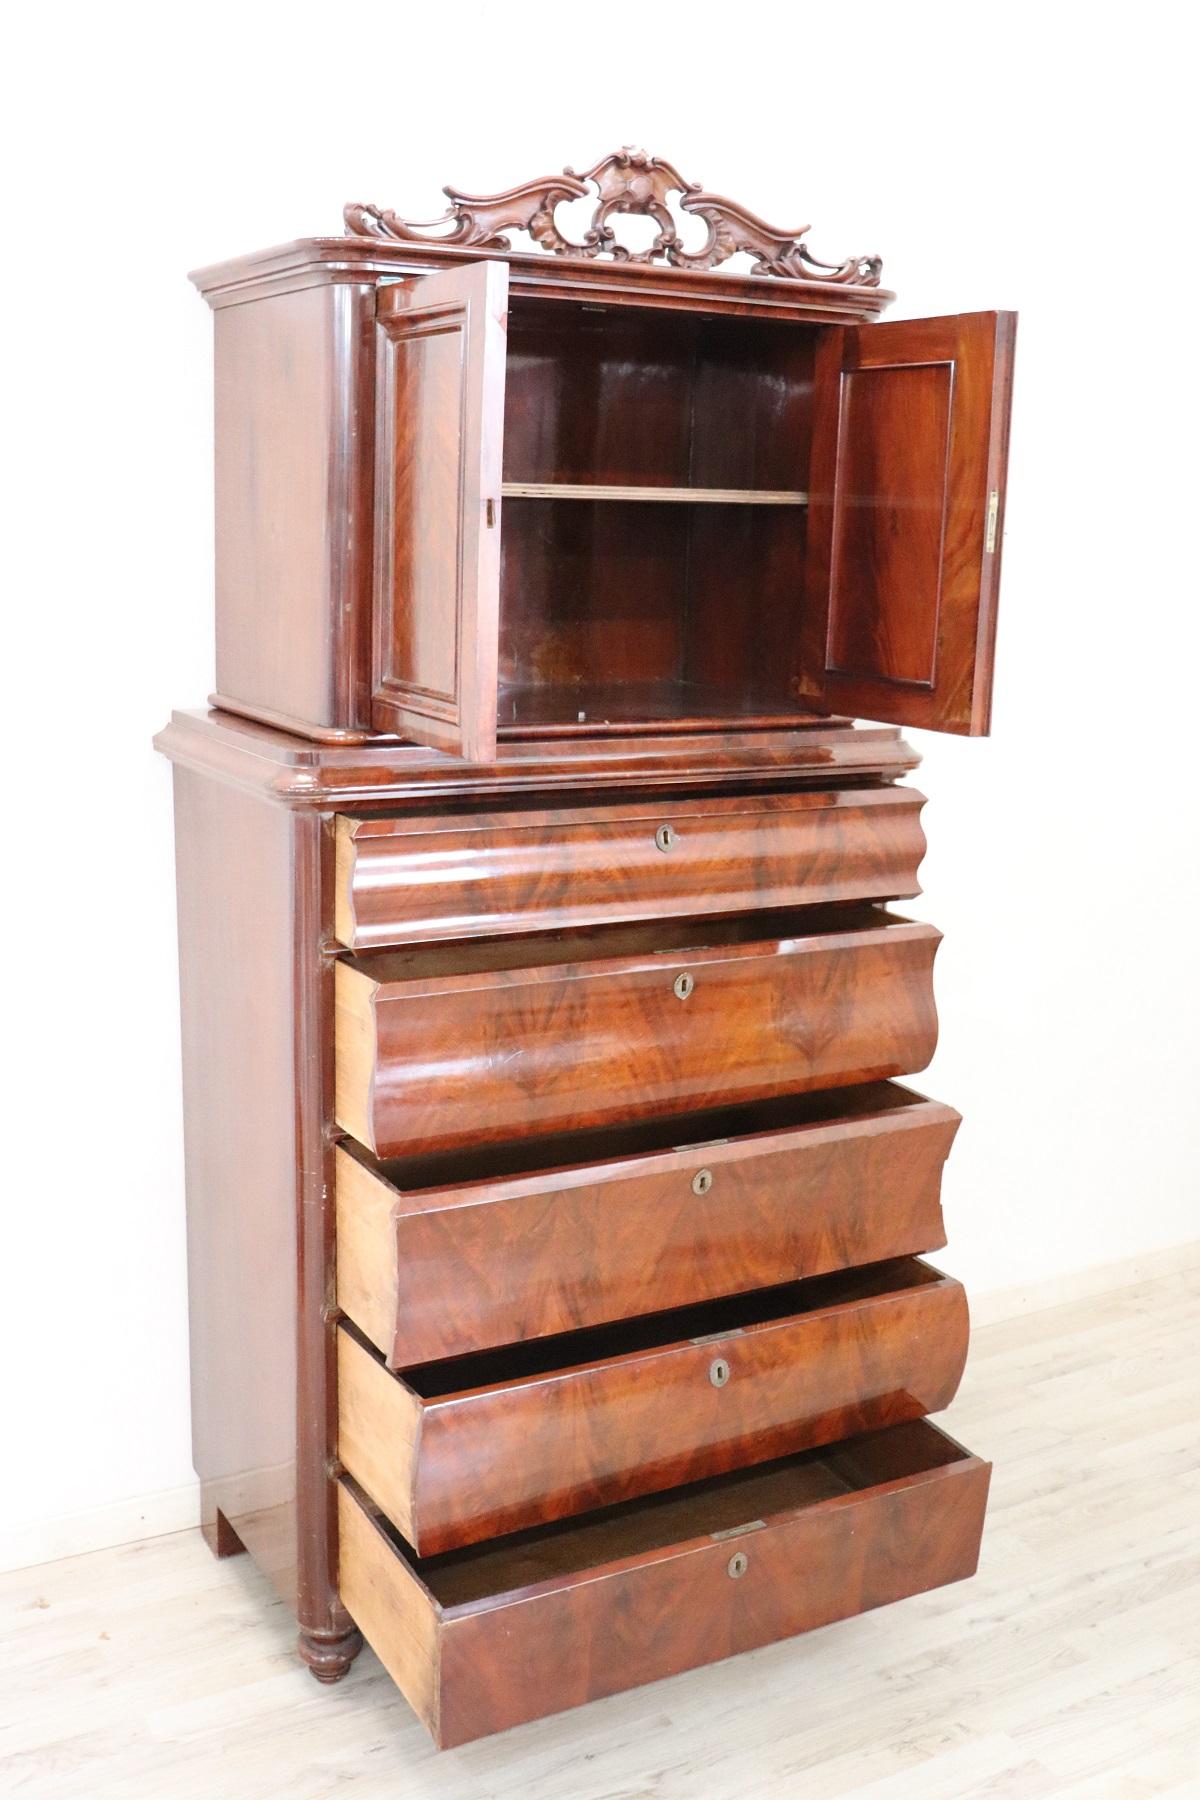 19th Century English Mahogany Commode or Tall Chest of Drawers, 1850s For Sale 5